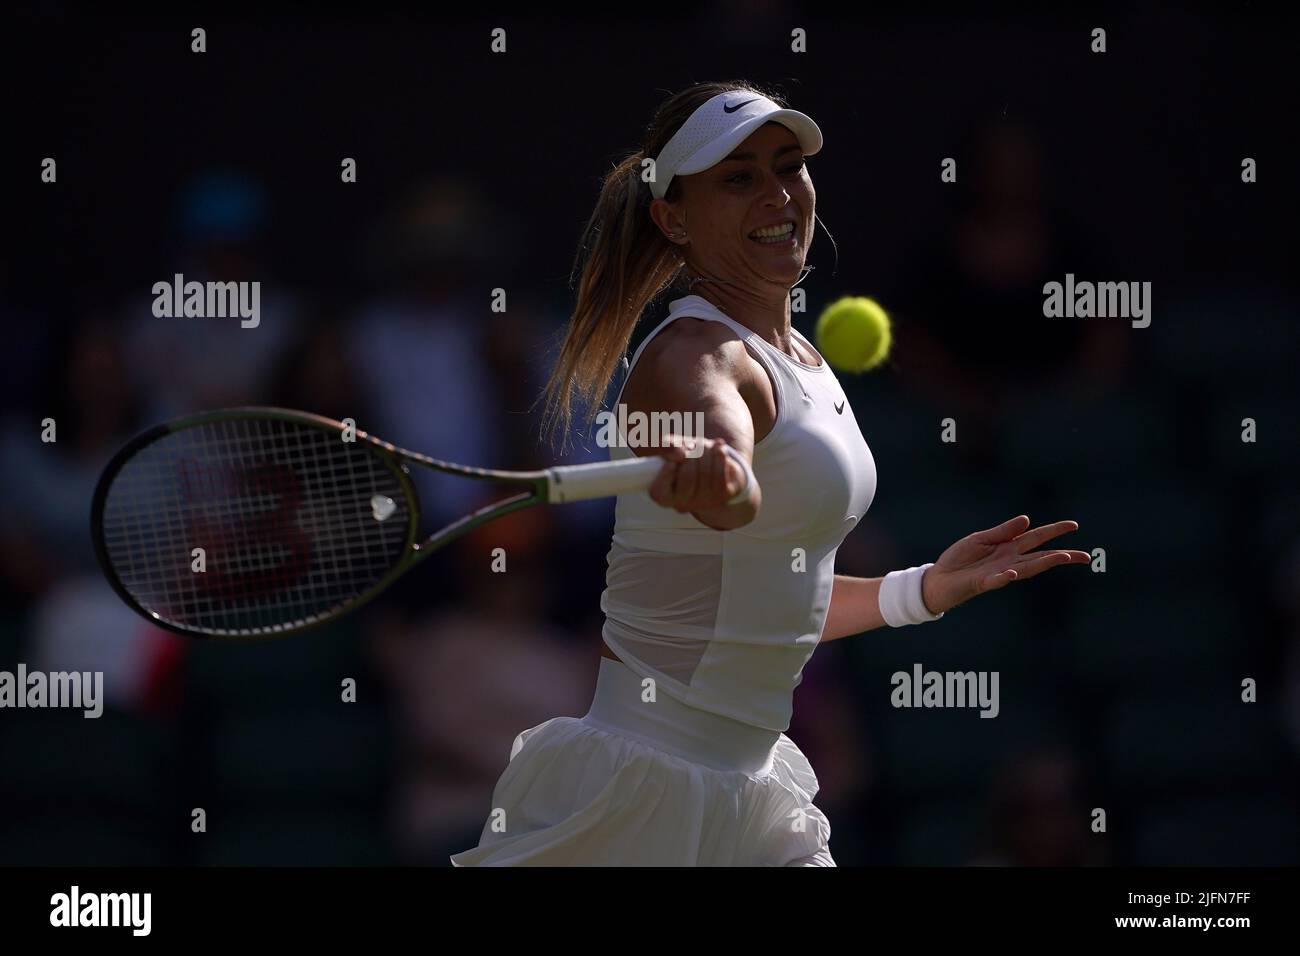 Paula Badosa in action during their Ladies' Singles fourth round match against Simona Halep on day eight of the 2022 Wimbledon Championships at the All England Lawn Tennis and Croquet Club, Wimbledon. Picture date: Monday July 4, 2022. Stock Photo